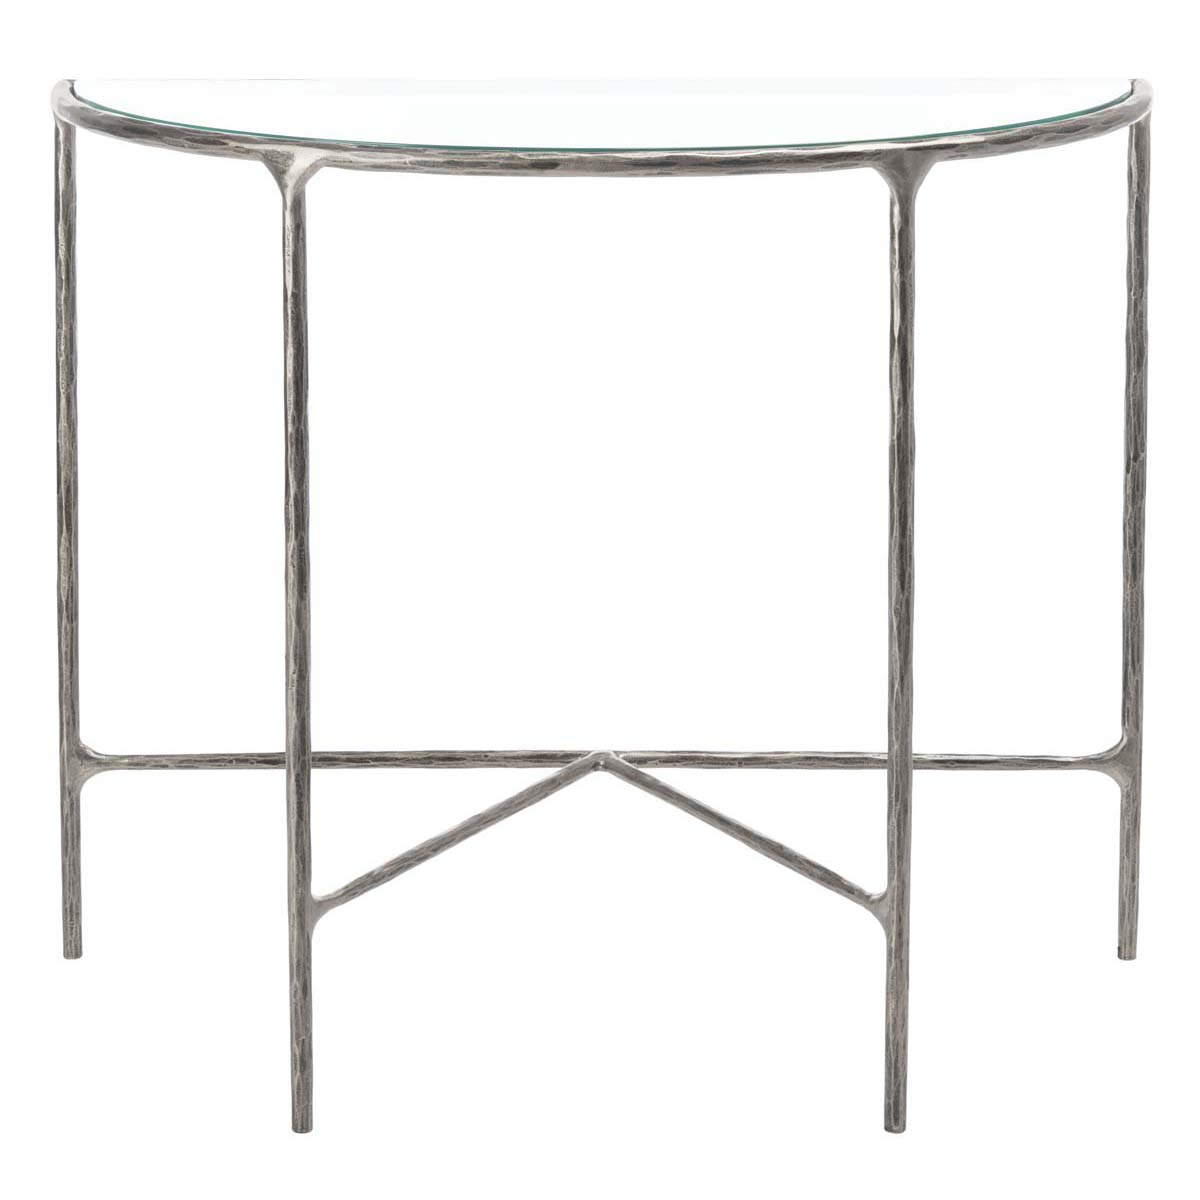 Safavieh Couture Jessa Forged Metal Console Tab